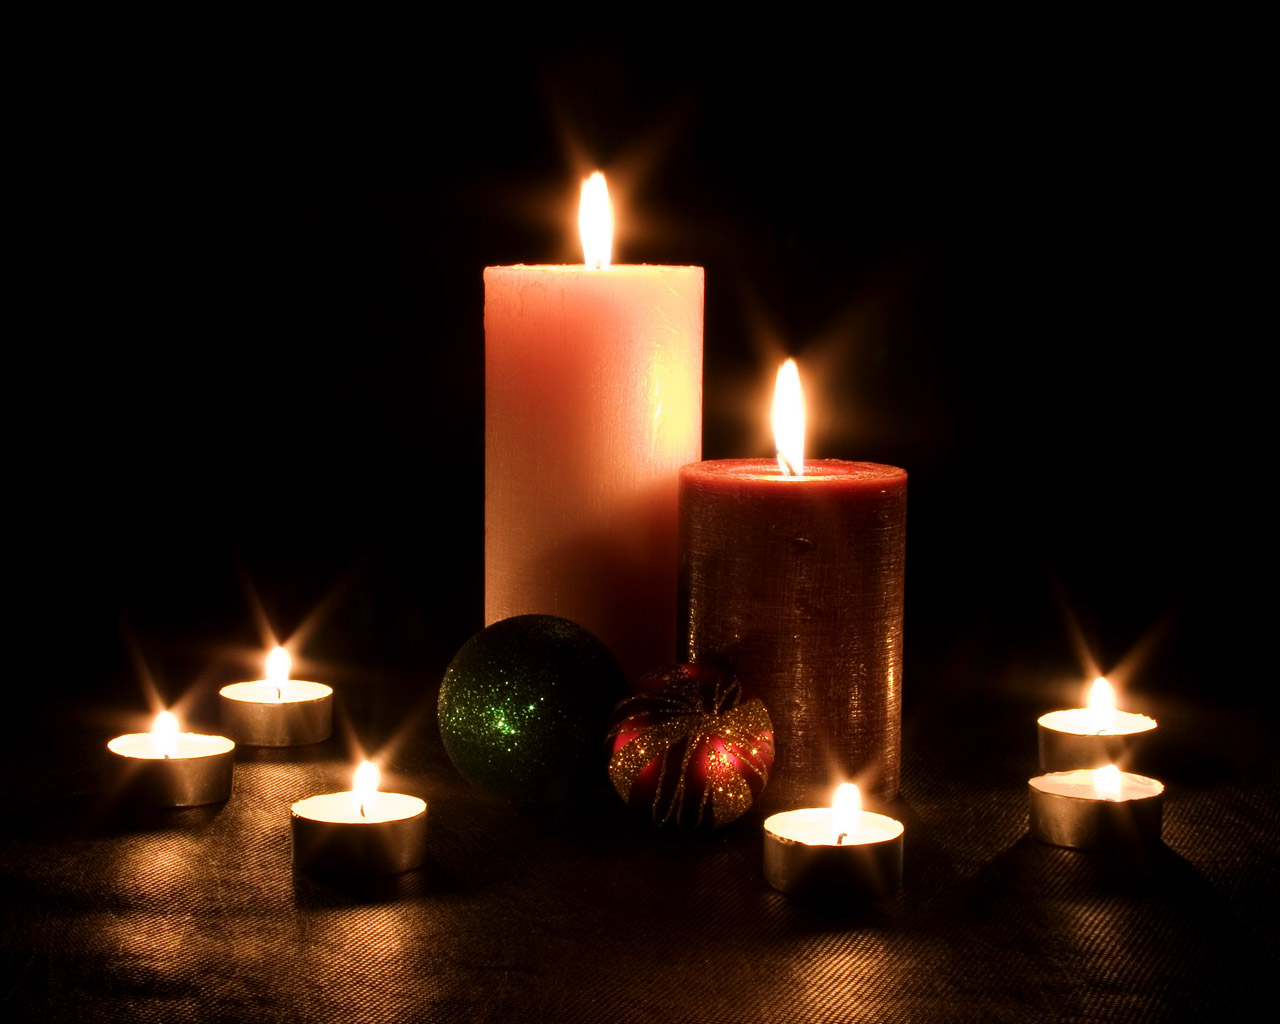 Romantic Candle Light Candlelight Pictures Candles At